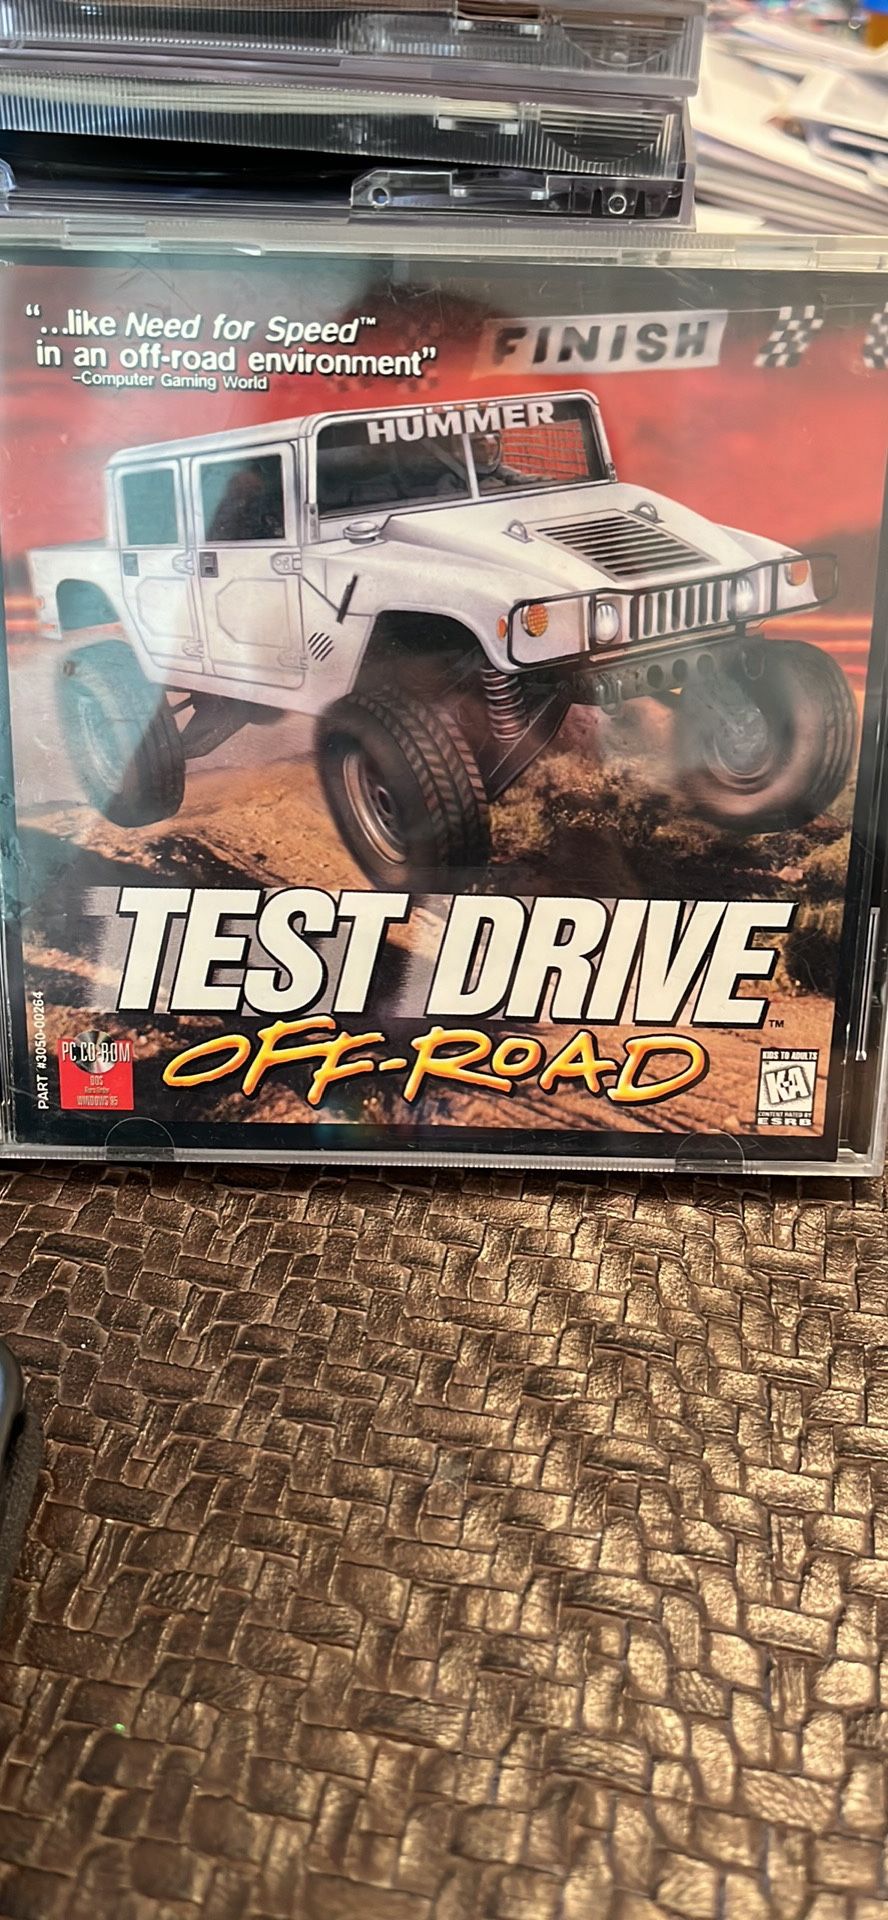 Test Drive Off Road CD-Rom Computer Game PC Windows Software 1997 Accolade